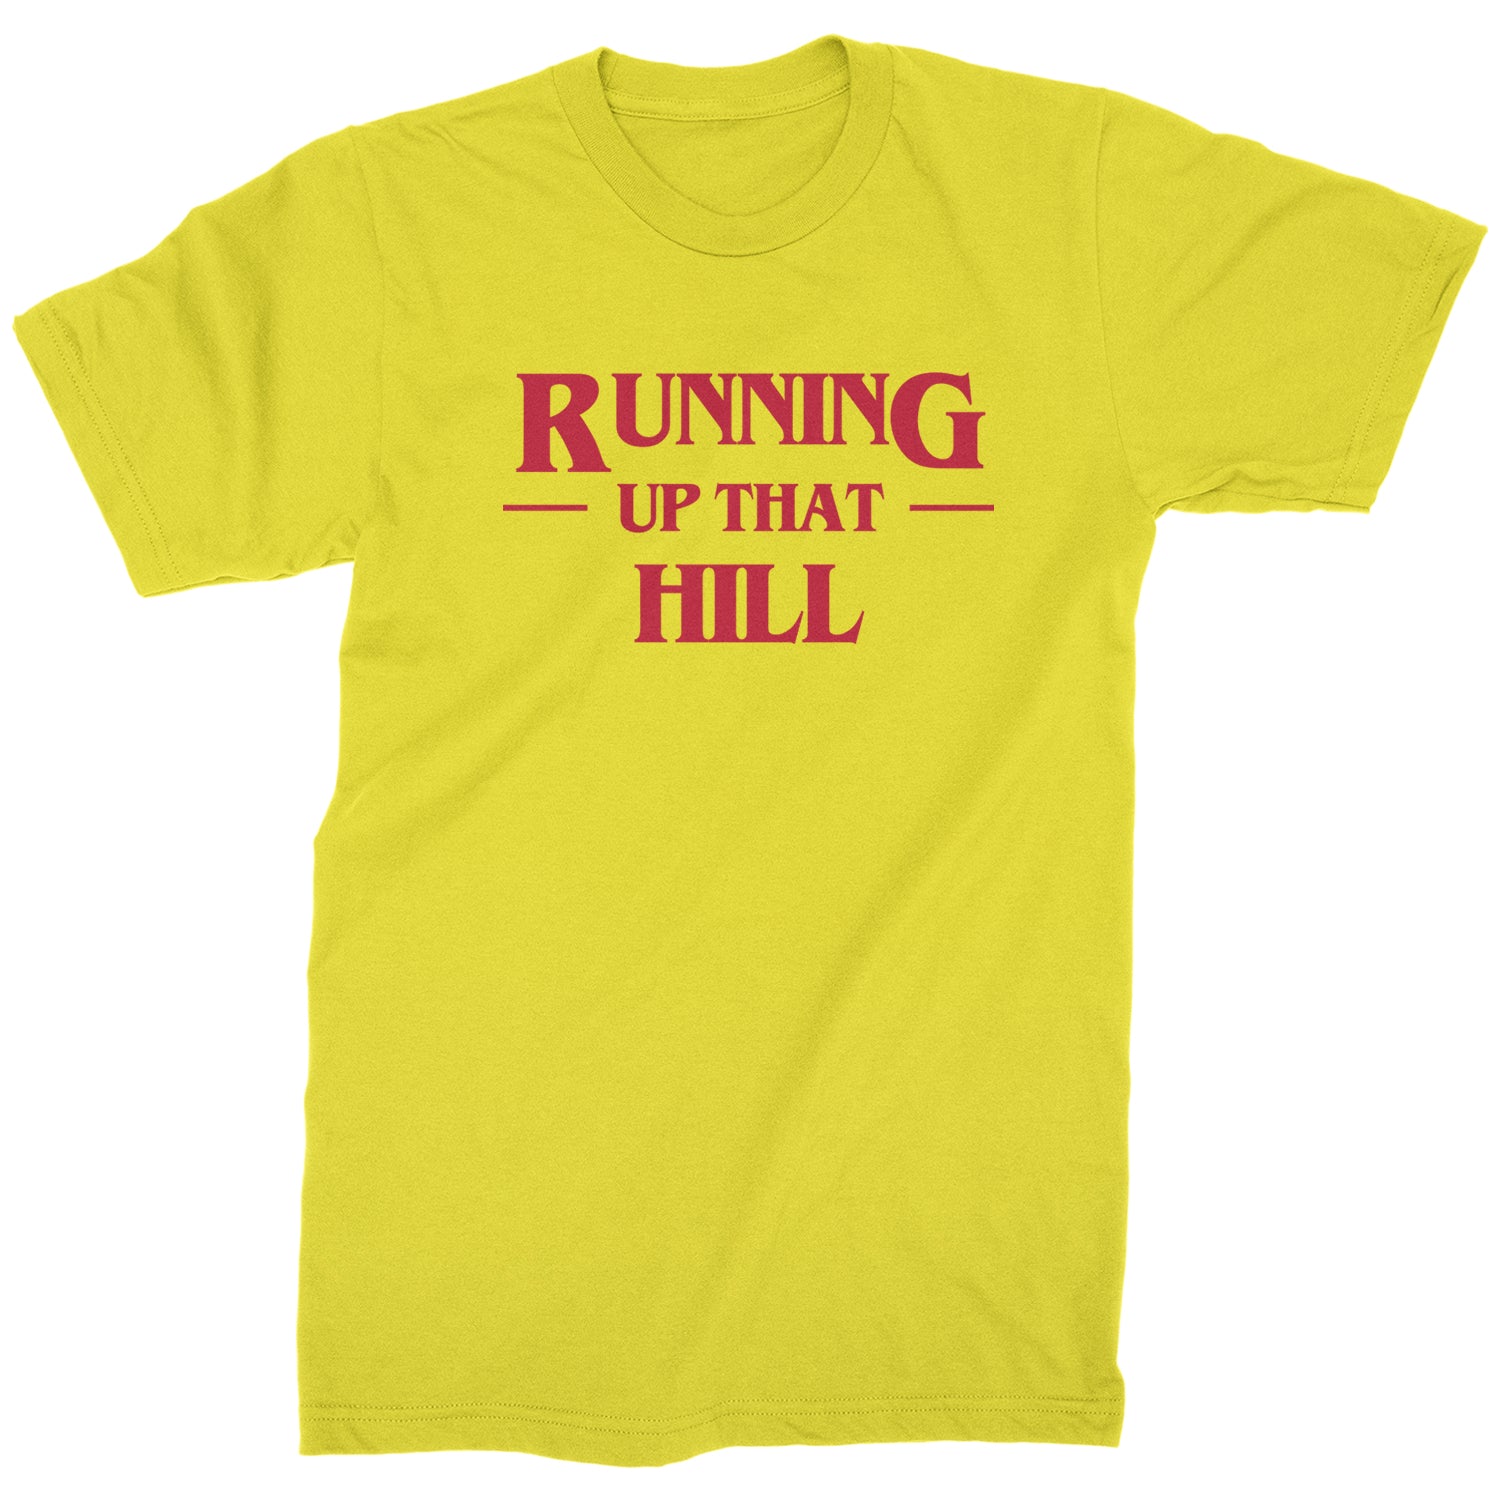 Running Up That Hill Mens T-shirt 4, don’t, eleven, four, friends, lie, season by Expression Tees